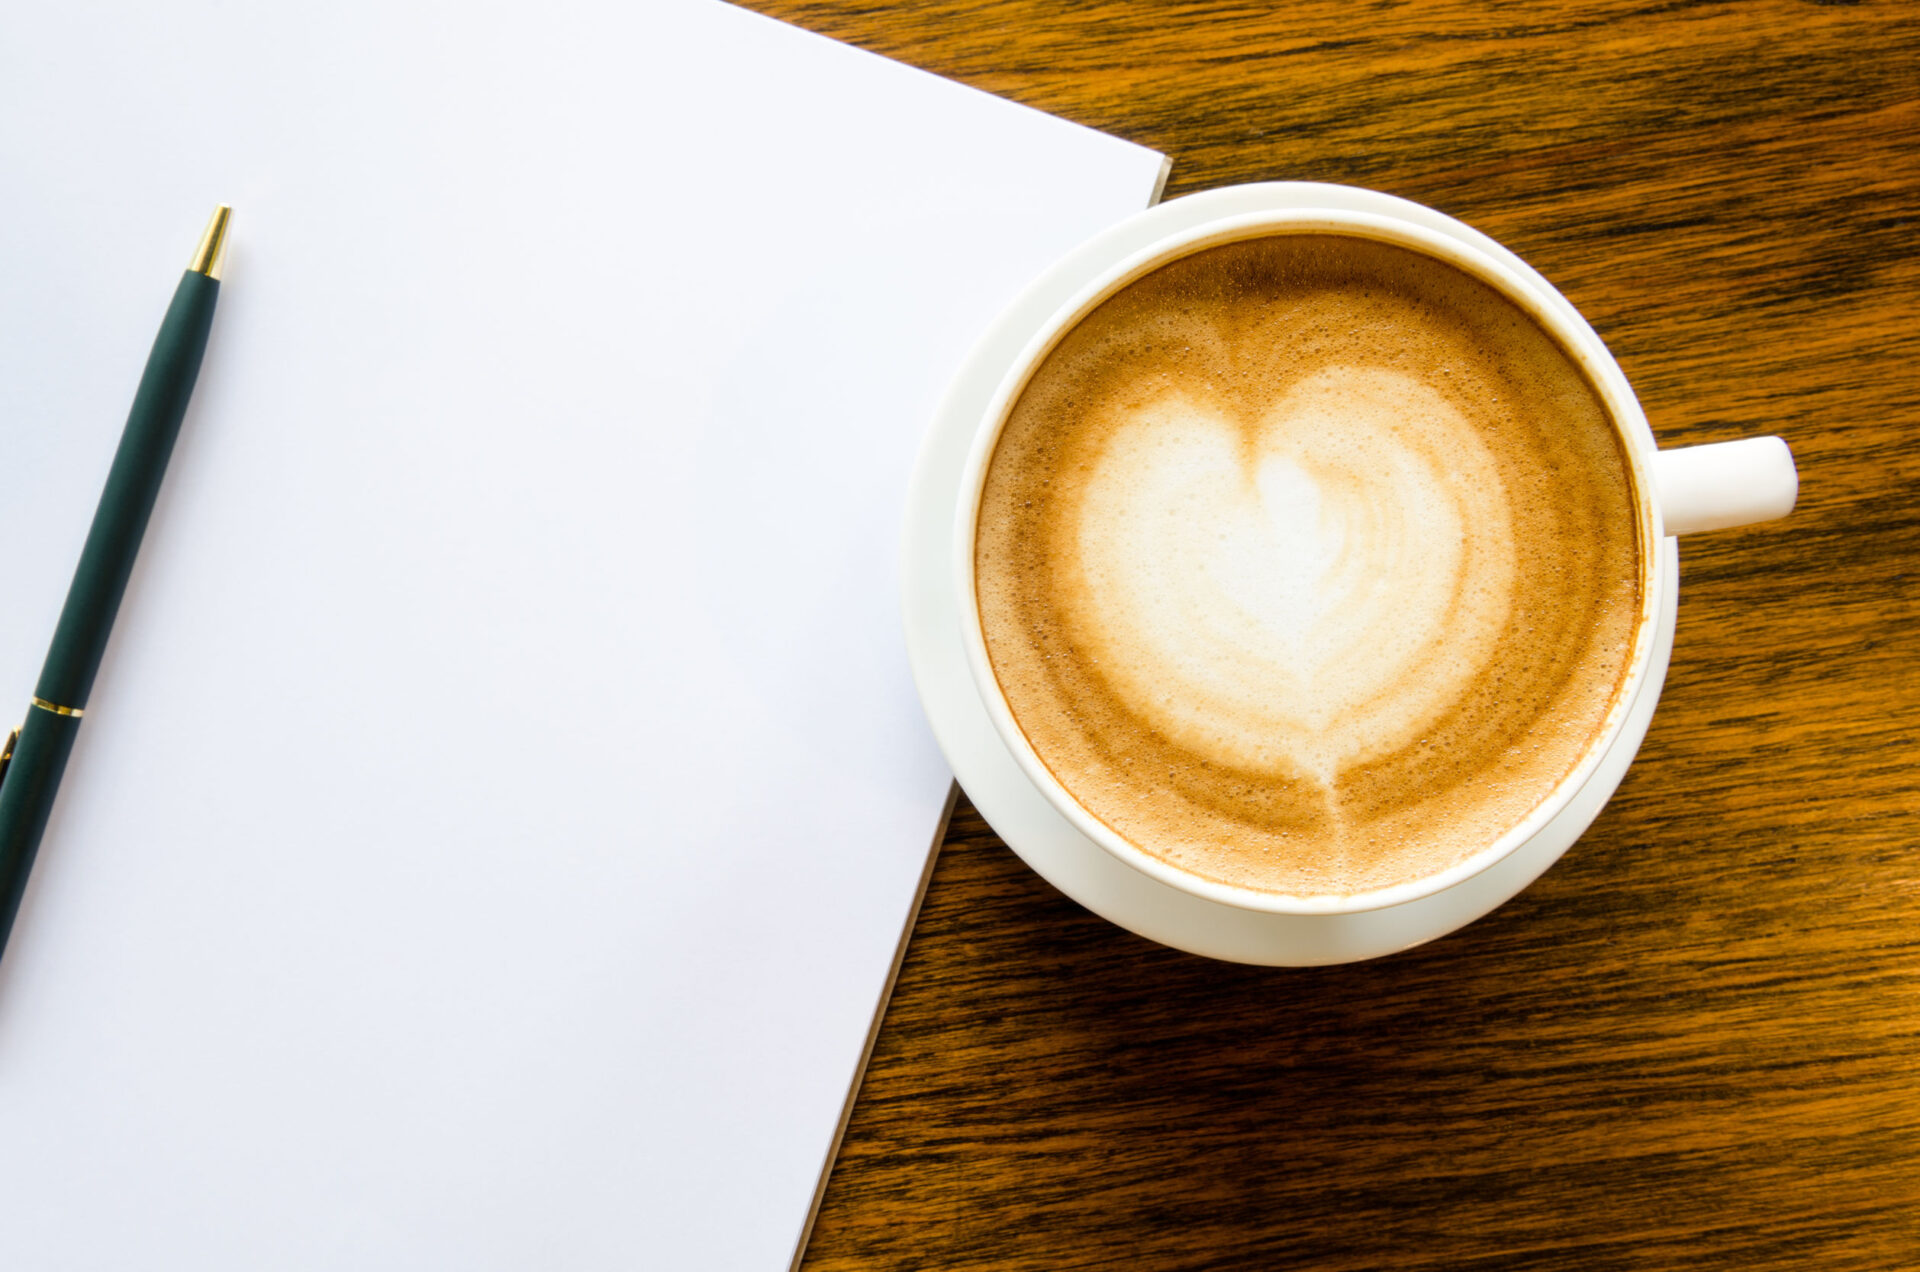 A cup of coffee with heart shape, pen and open blank book on wood background